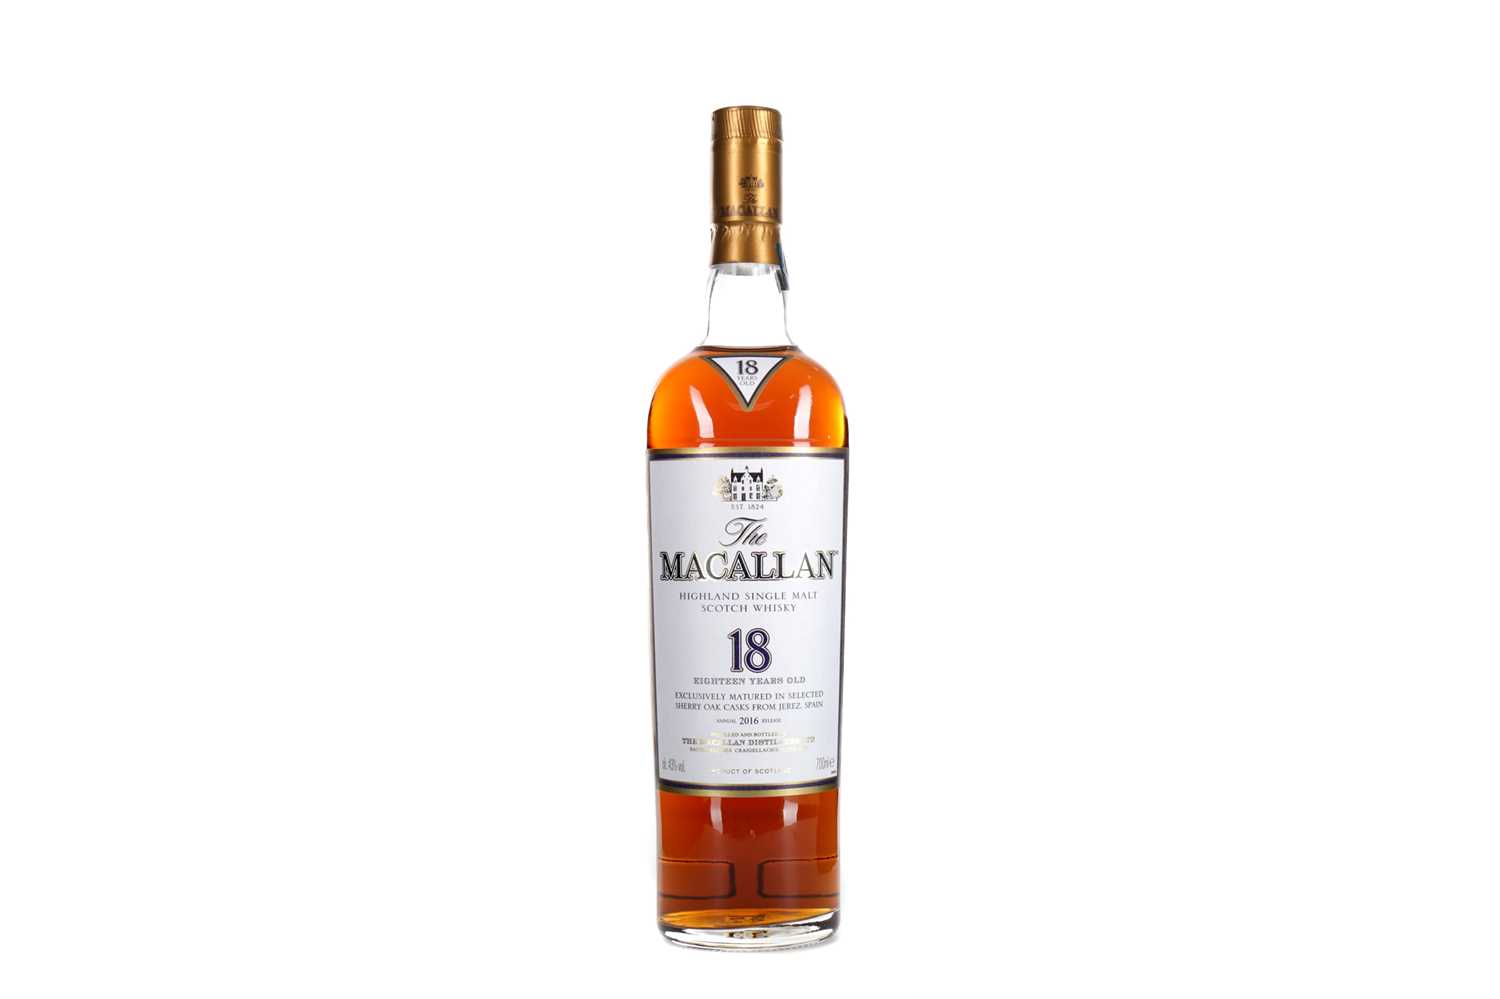 Lot 138 - MACALLAN 18 YEARS OLD 2016 RELEASE